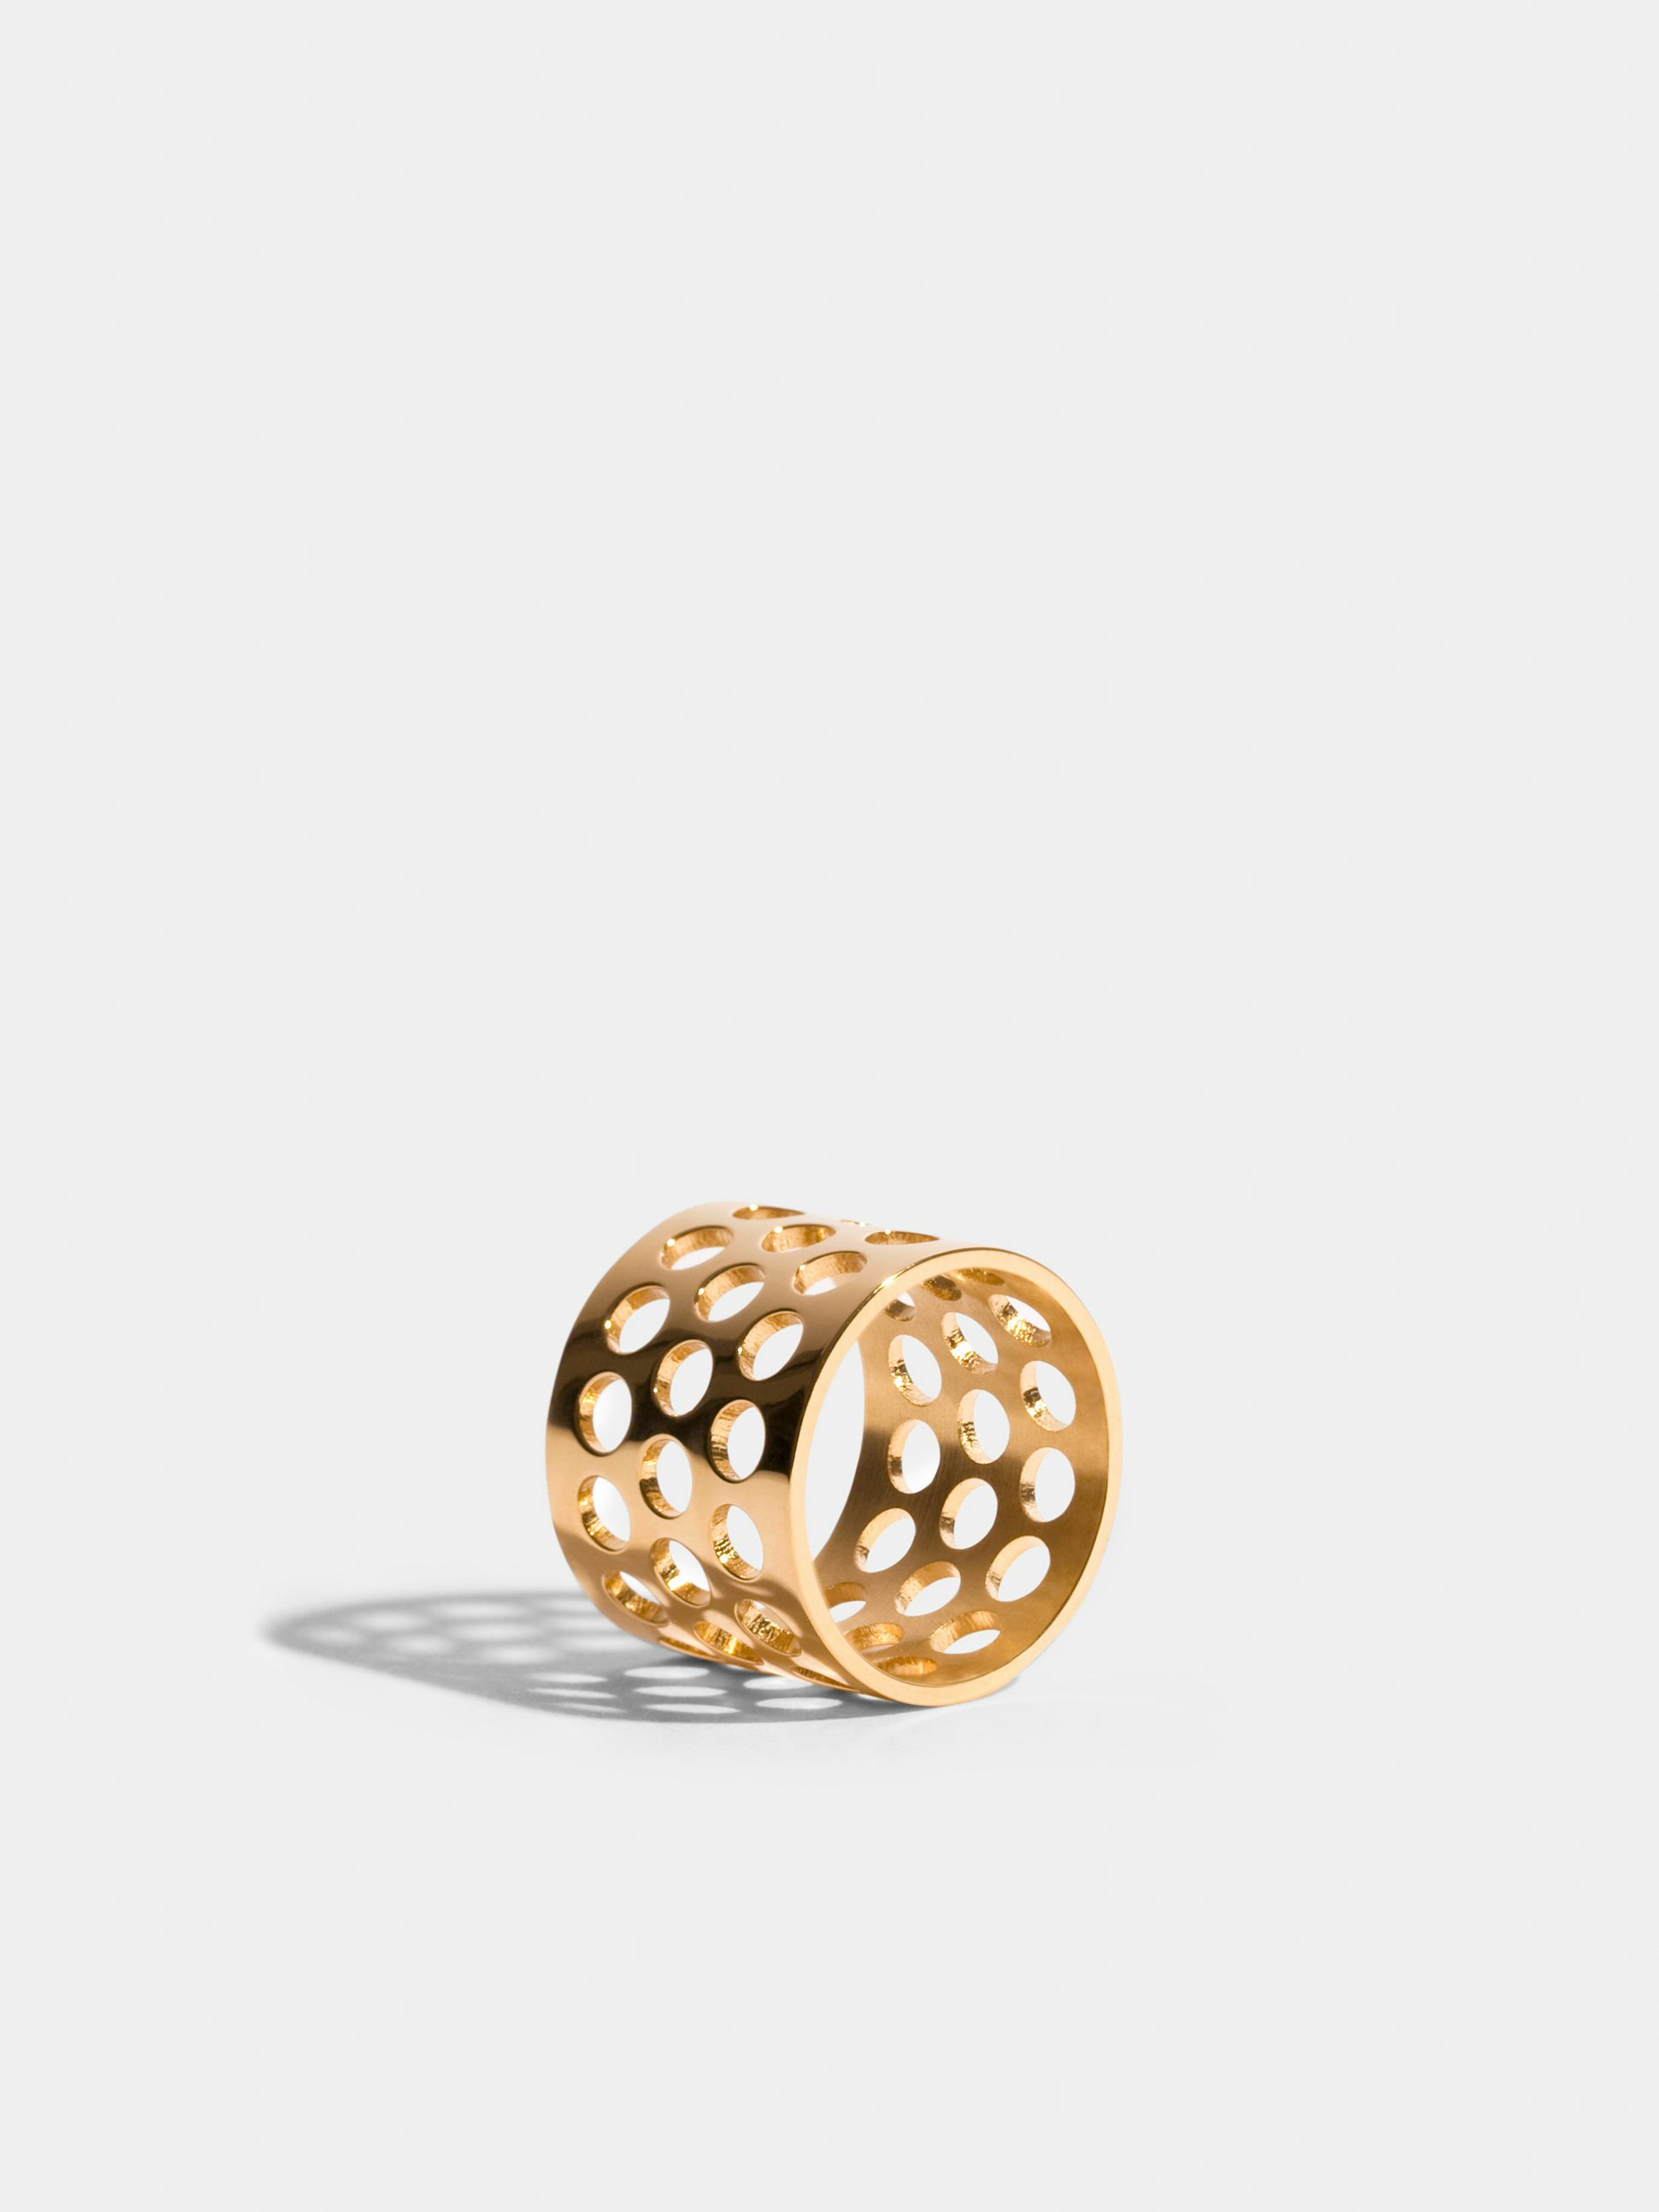 Voids, JEM by India Mahdavi, ring VI in 18k Fairmined ethical yellow gold (3 rows, large perforations)